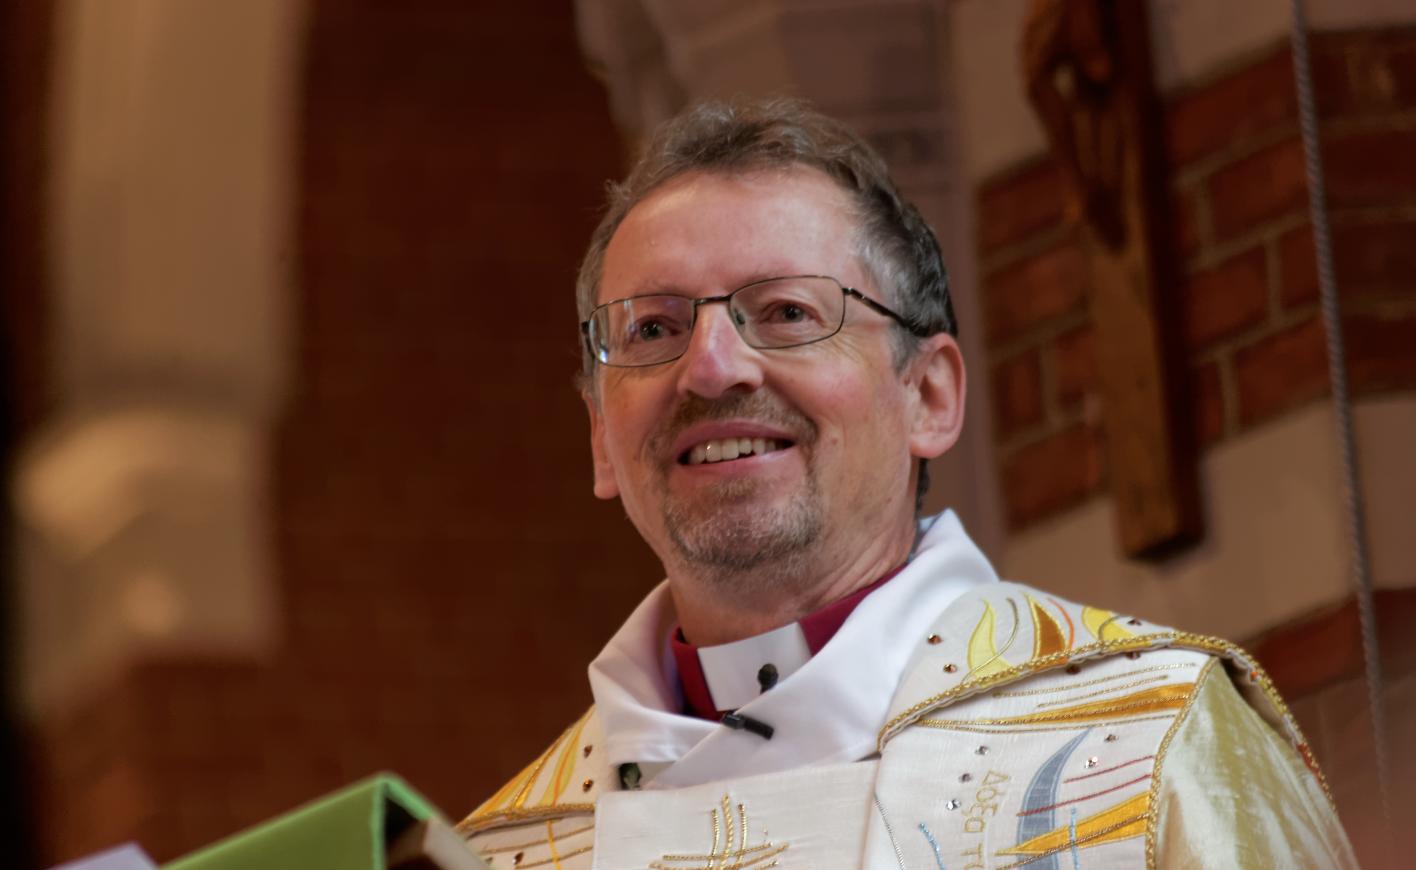 The Bishop of Gibraltar in Europe - The Rt Revd Dr Robert Innes 